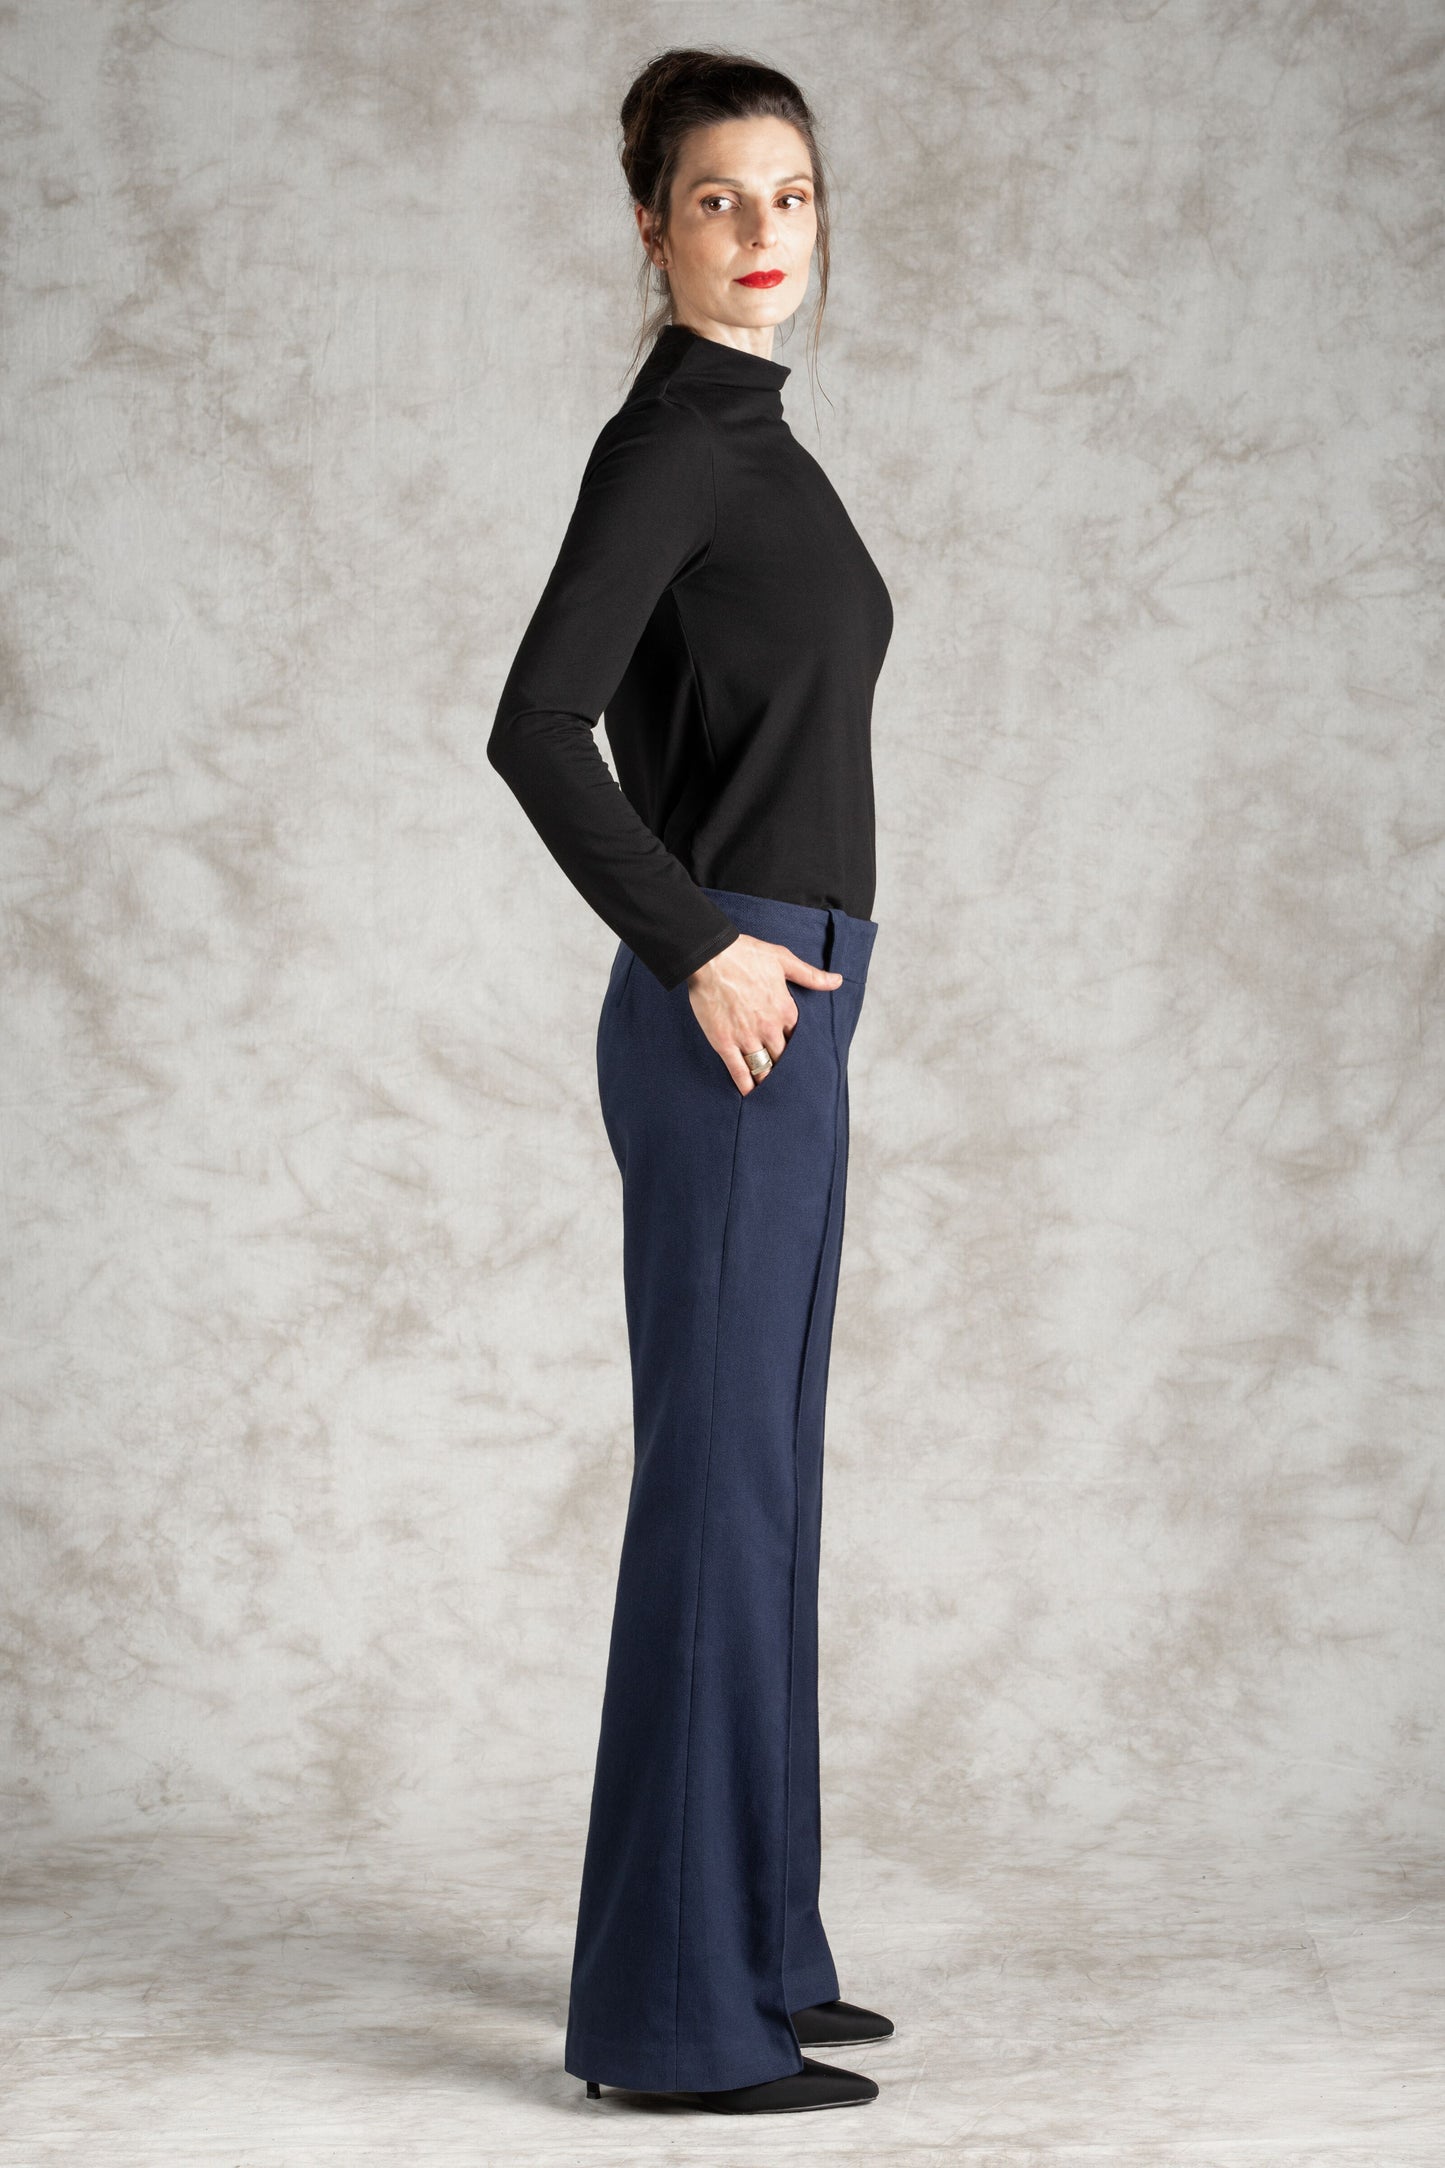 The Pin-Tuck Trouser